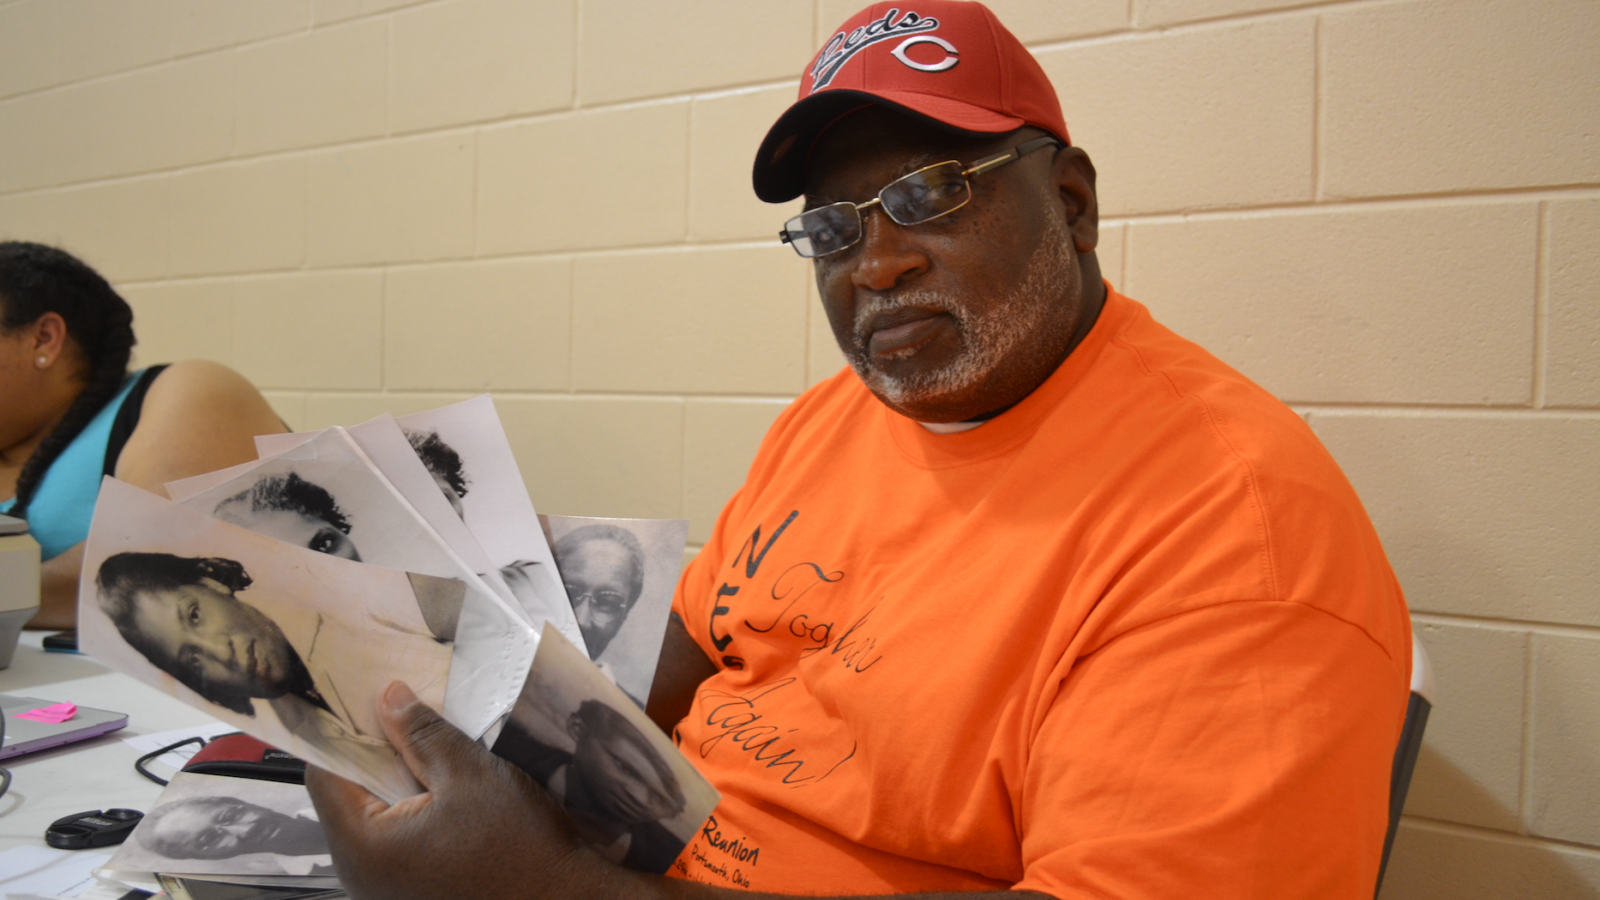 Roderick Wilson scans his family photographs at the North End Super Reunion, July 2017.